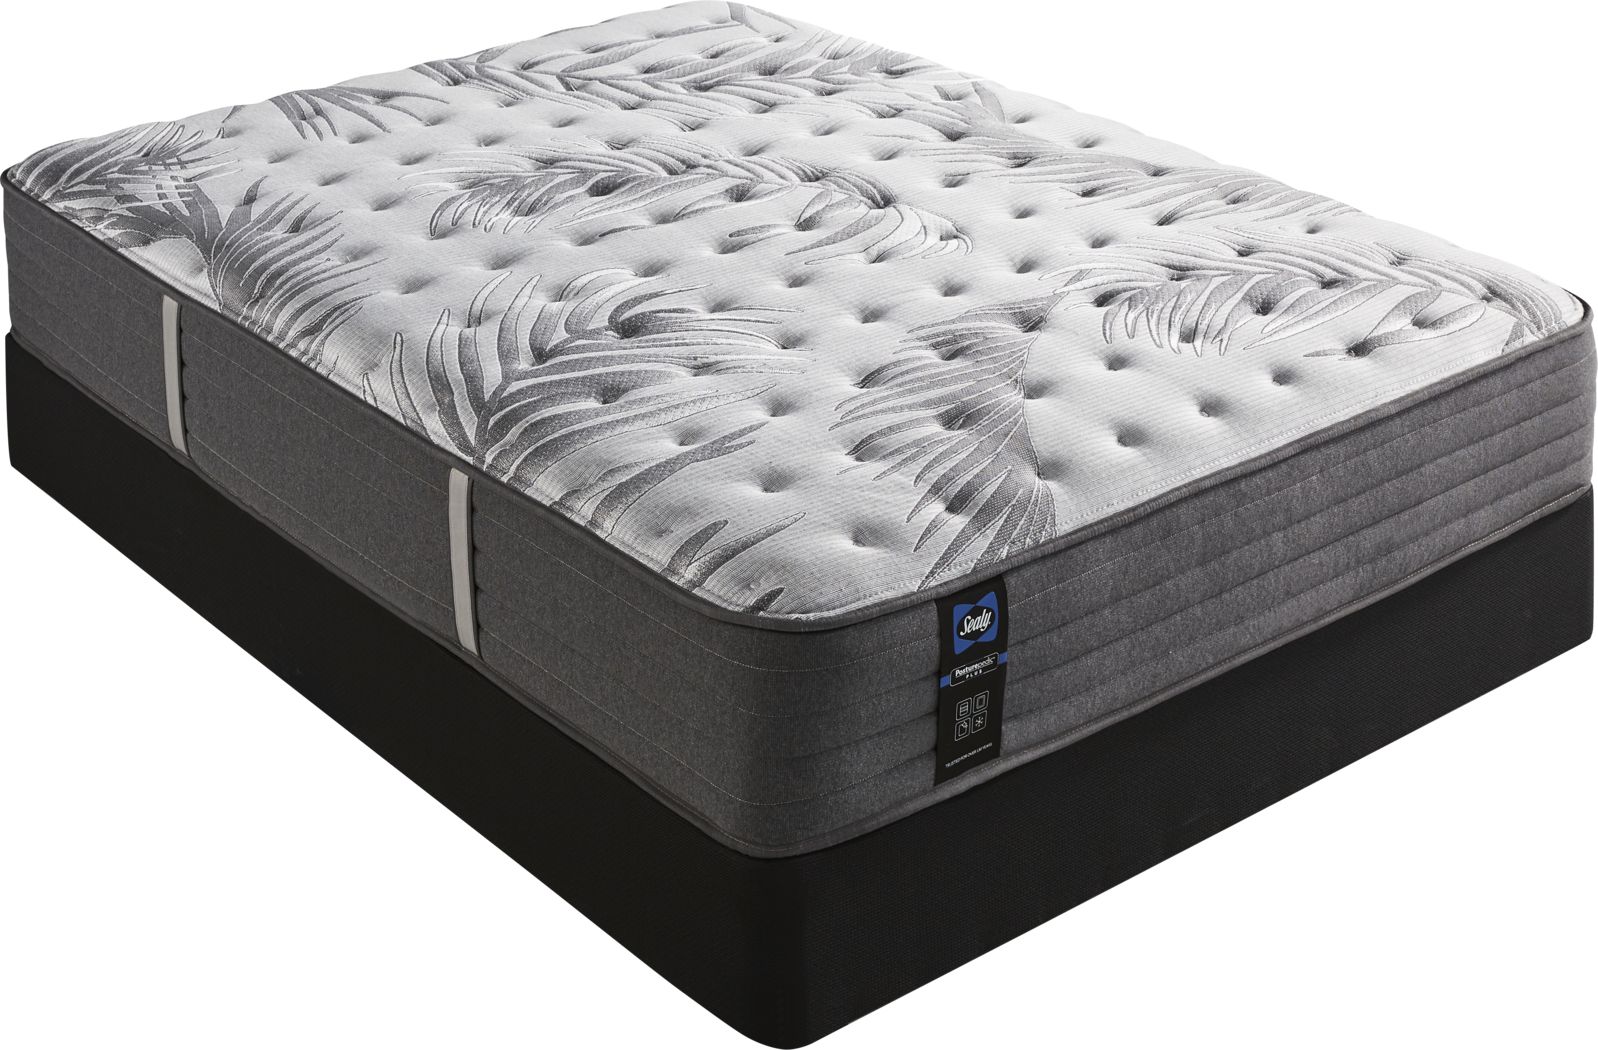 used queen size mattress set for sale